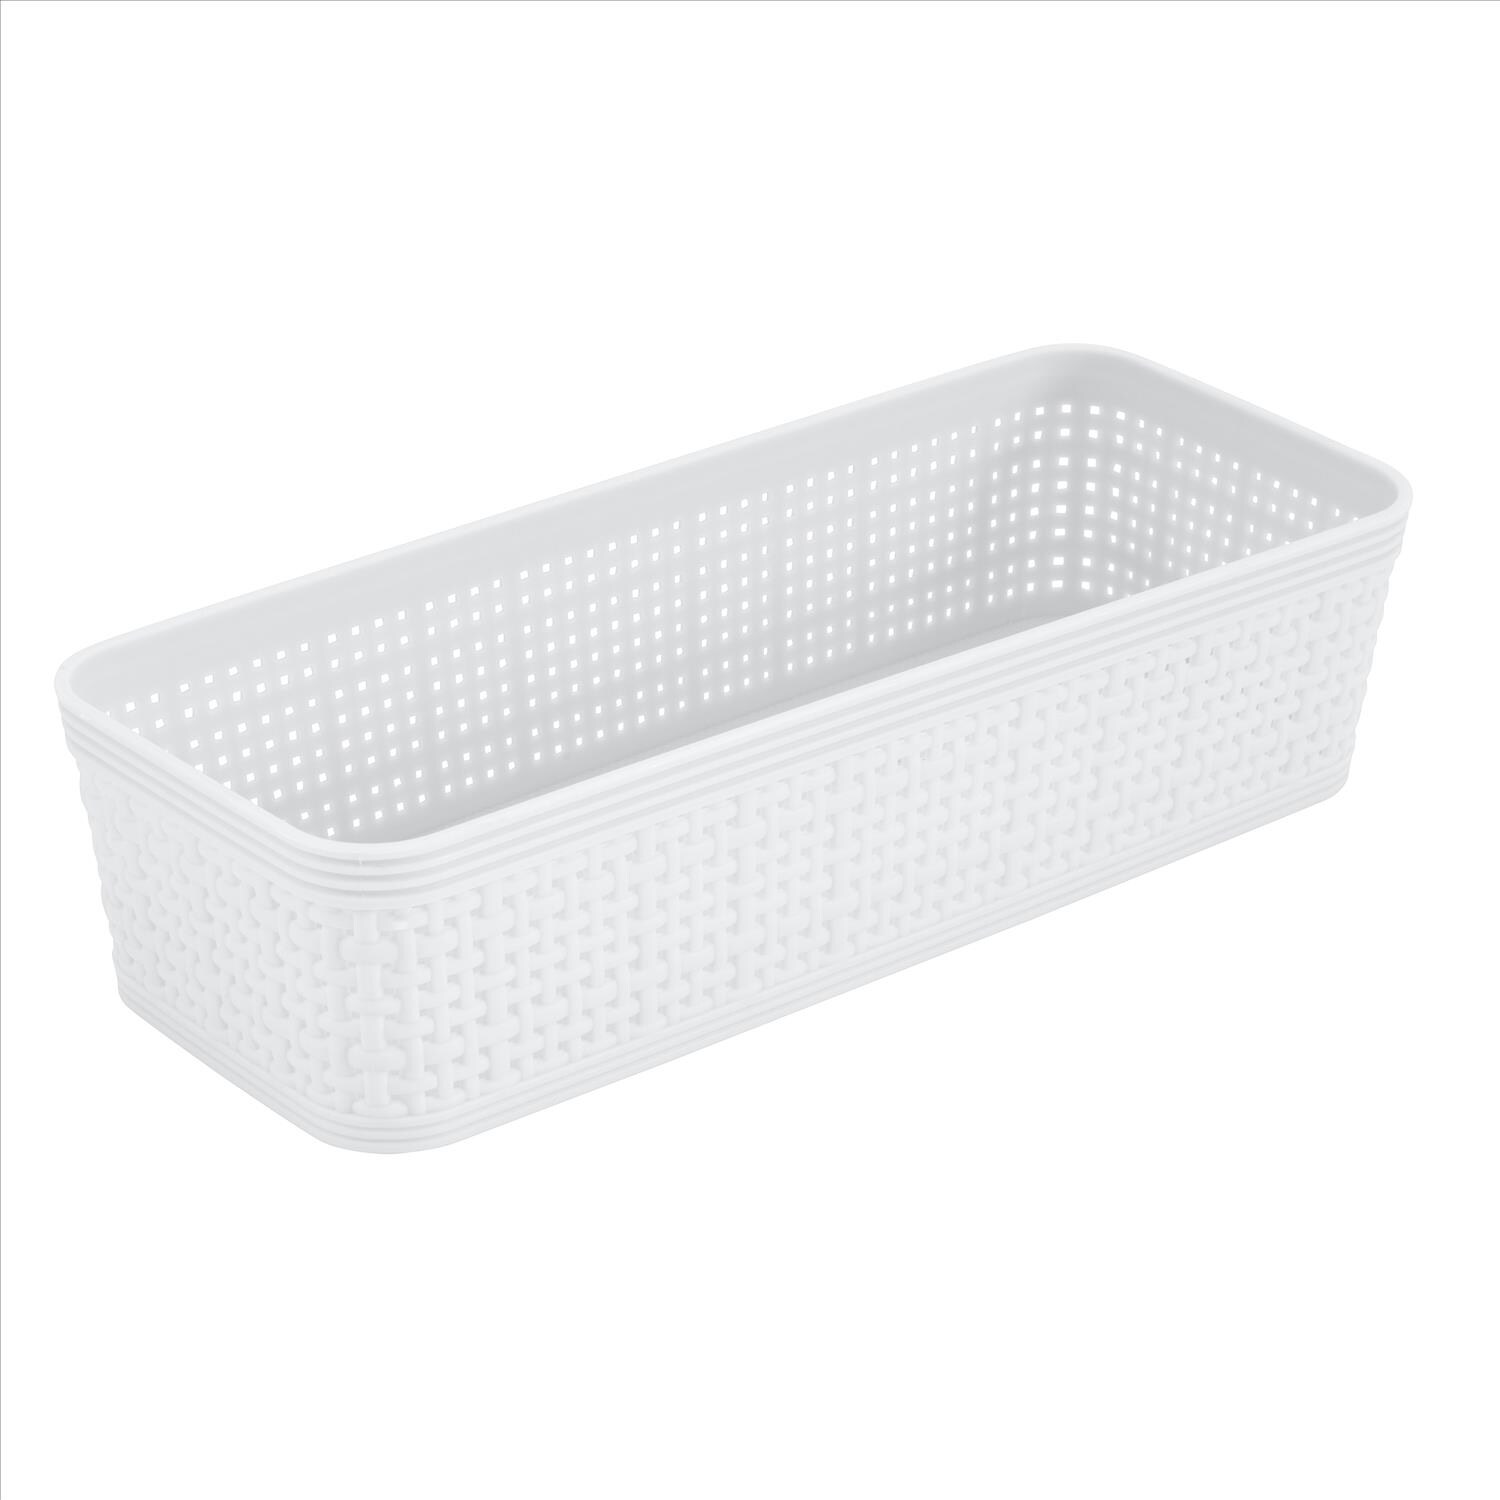 Organizer, plastic, white and clear, 4-3/4 x 4-5/8 x 3-13/16